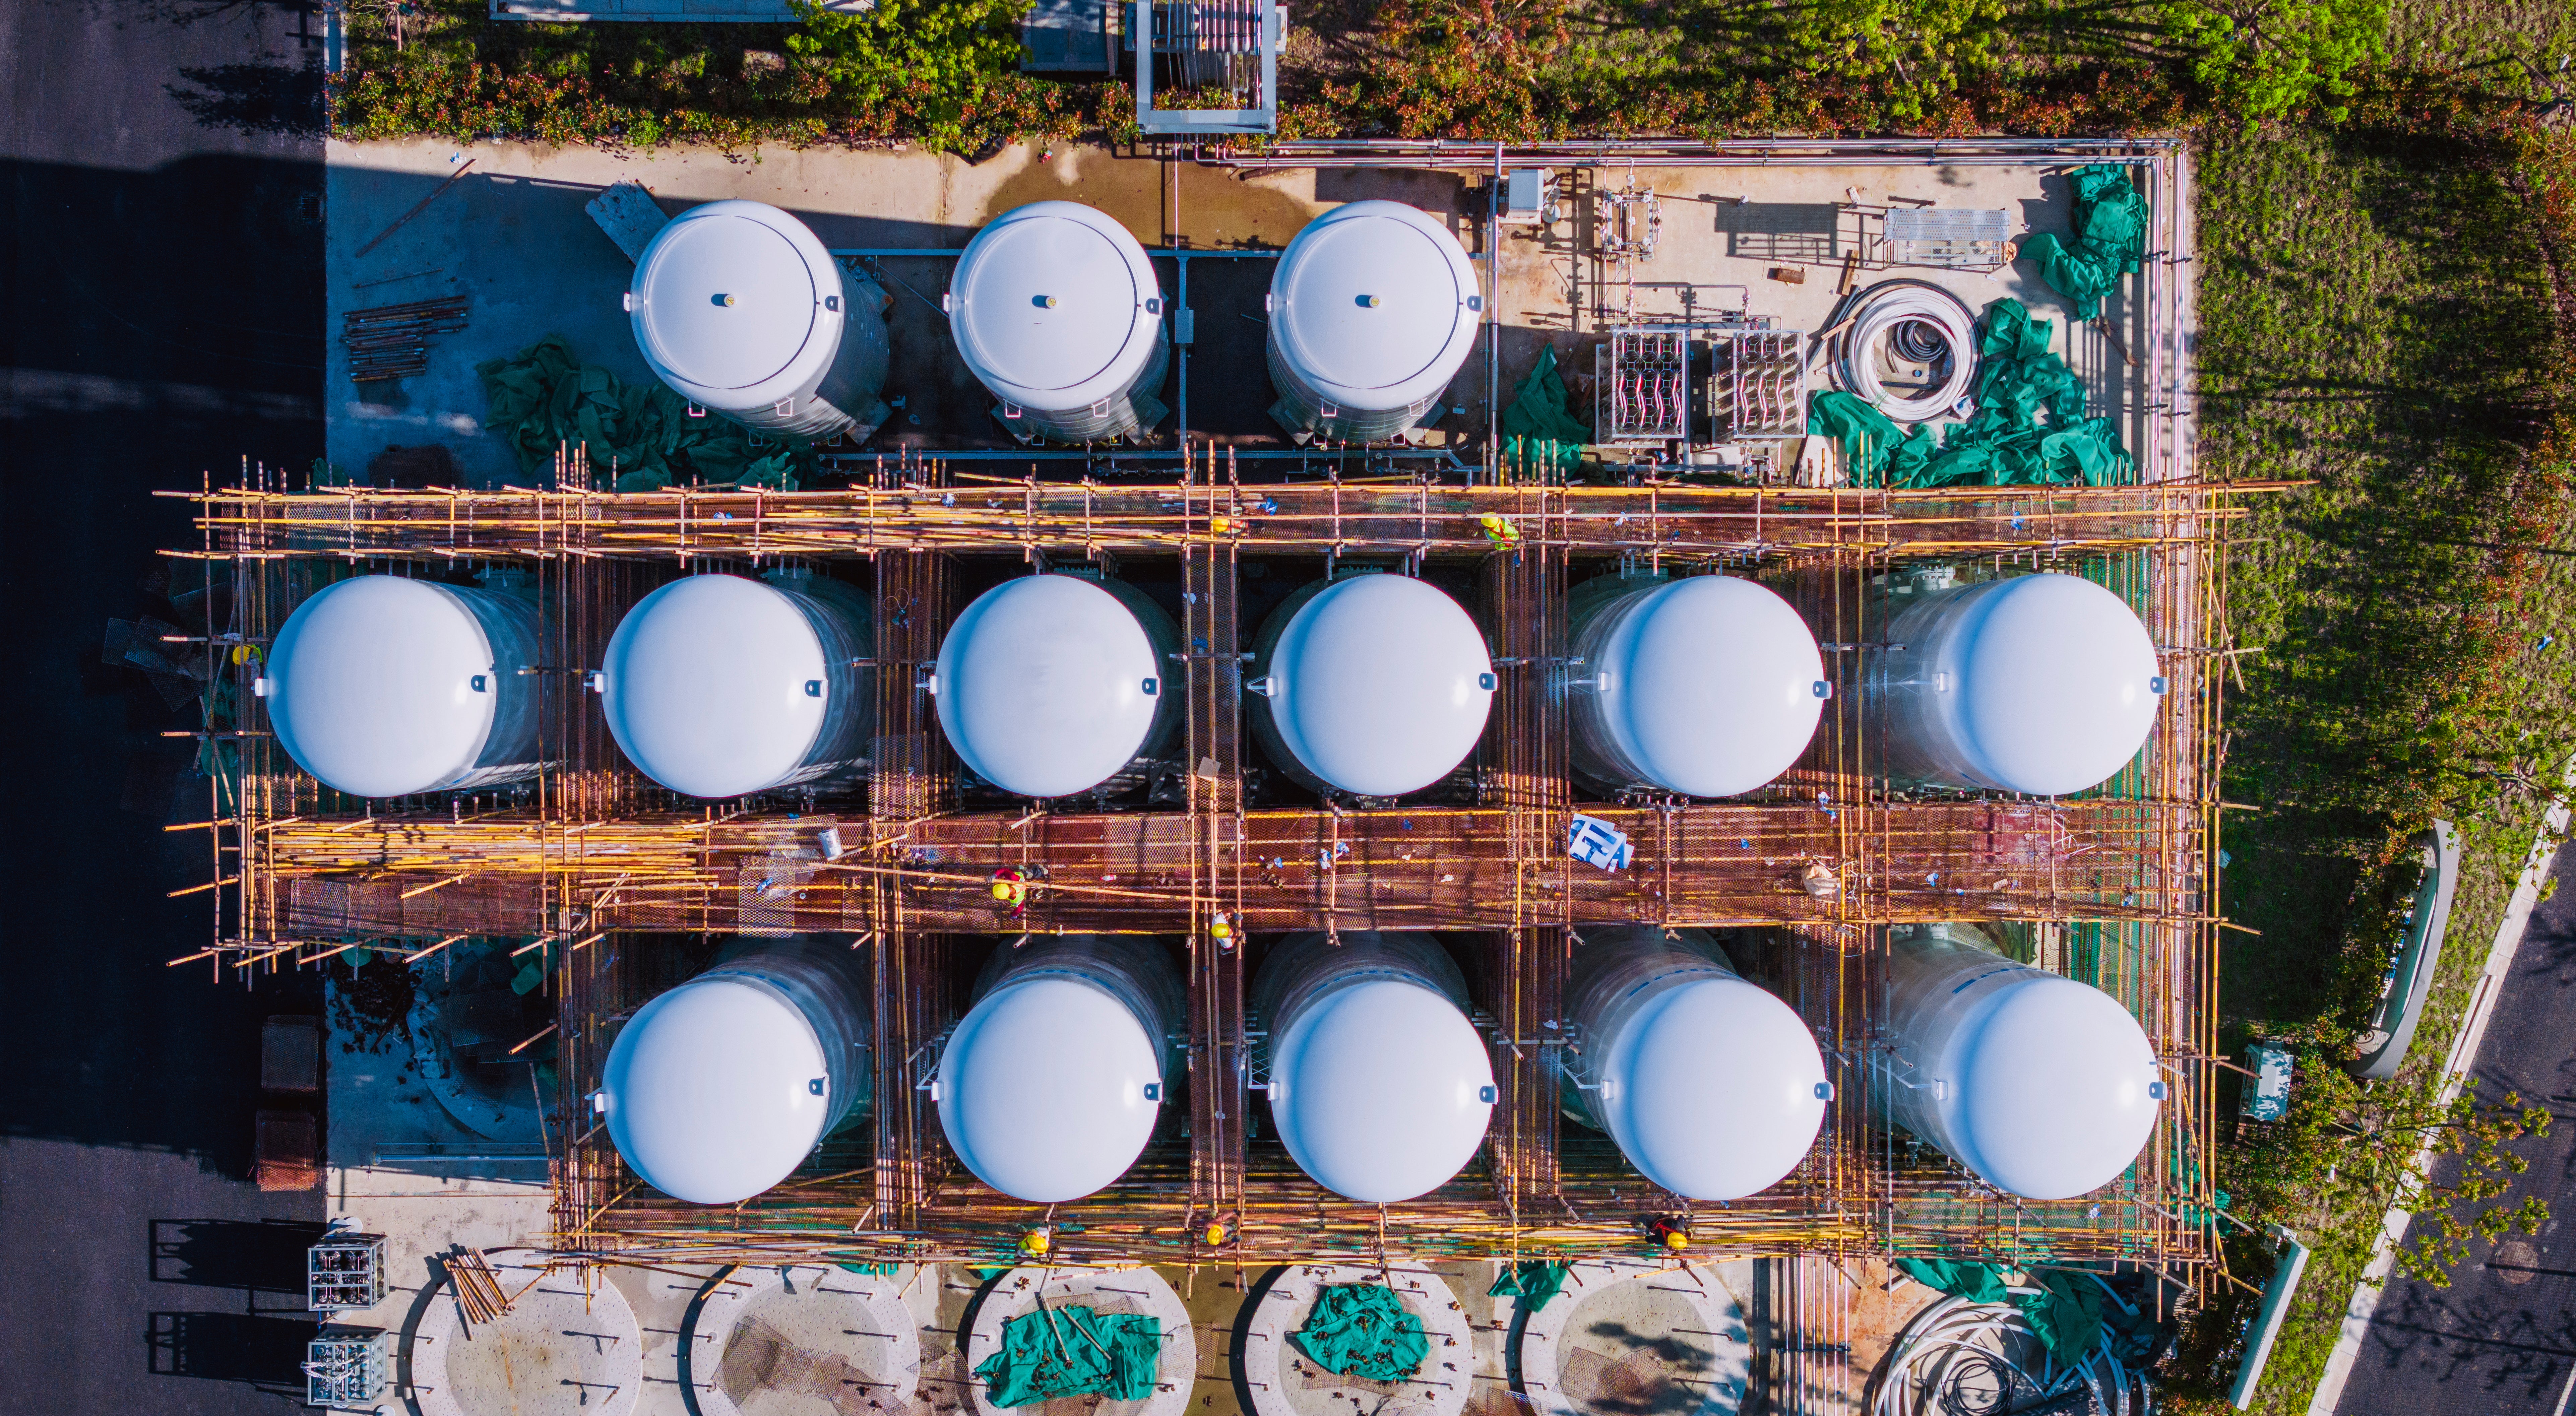 Hydrogen storage tanks. The energy source is attracting billions in investment as countries race to wean themselves off fossil fuels